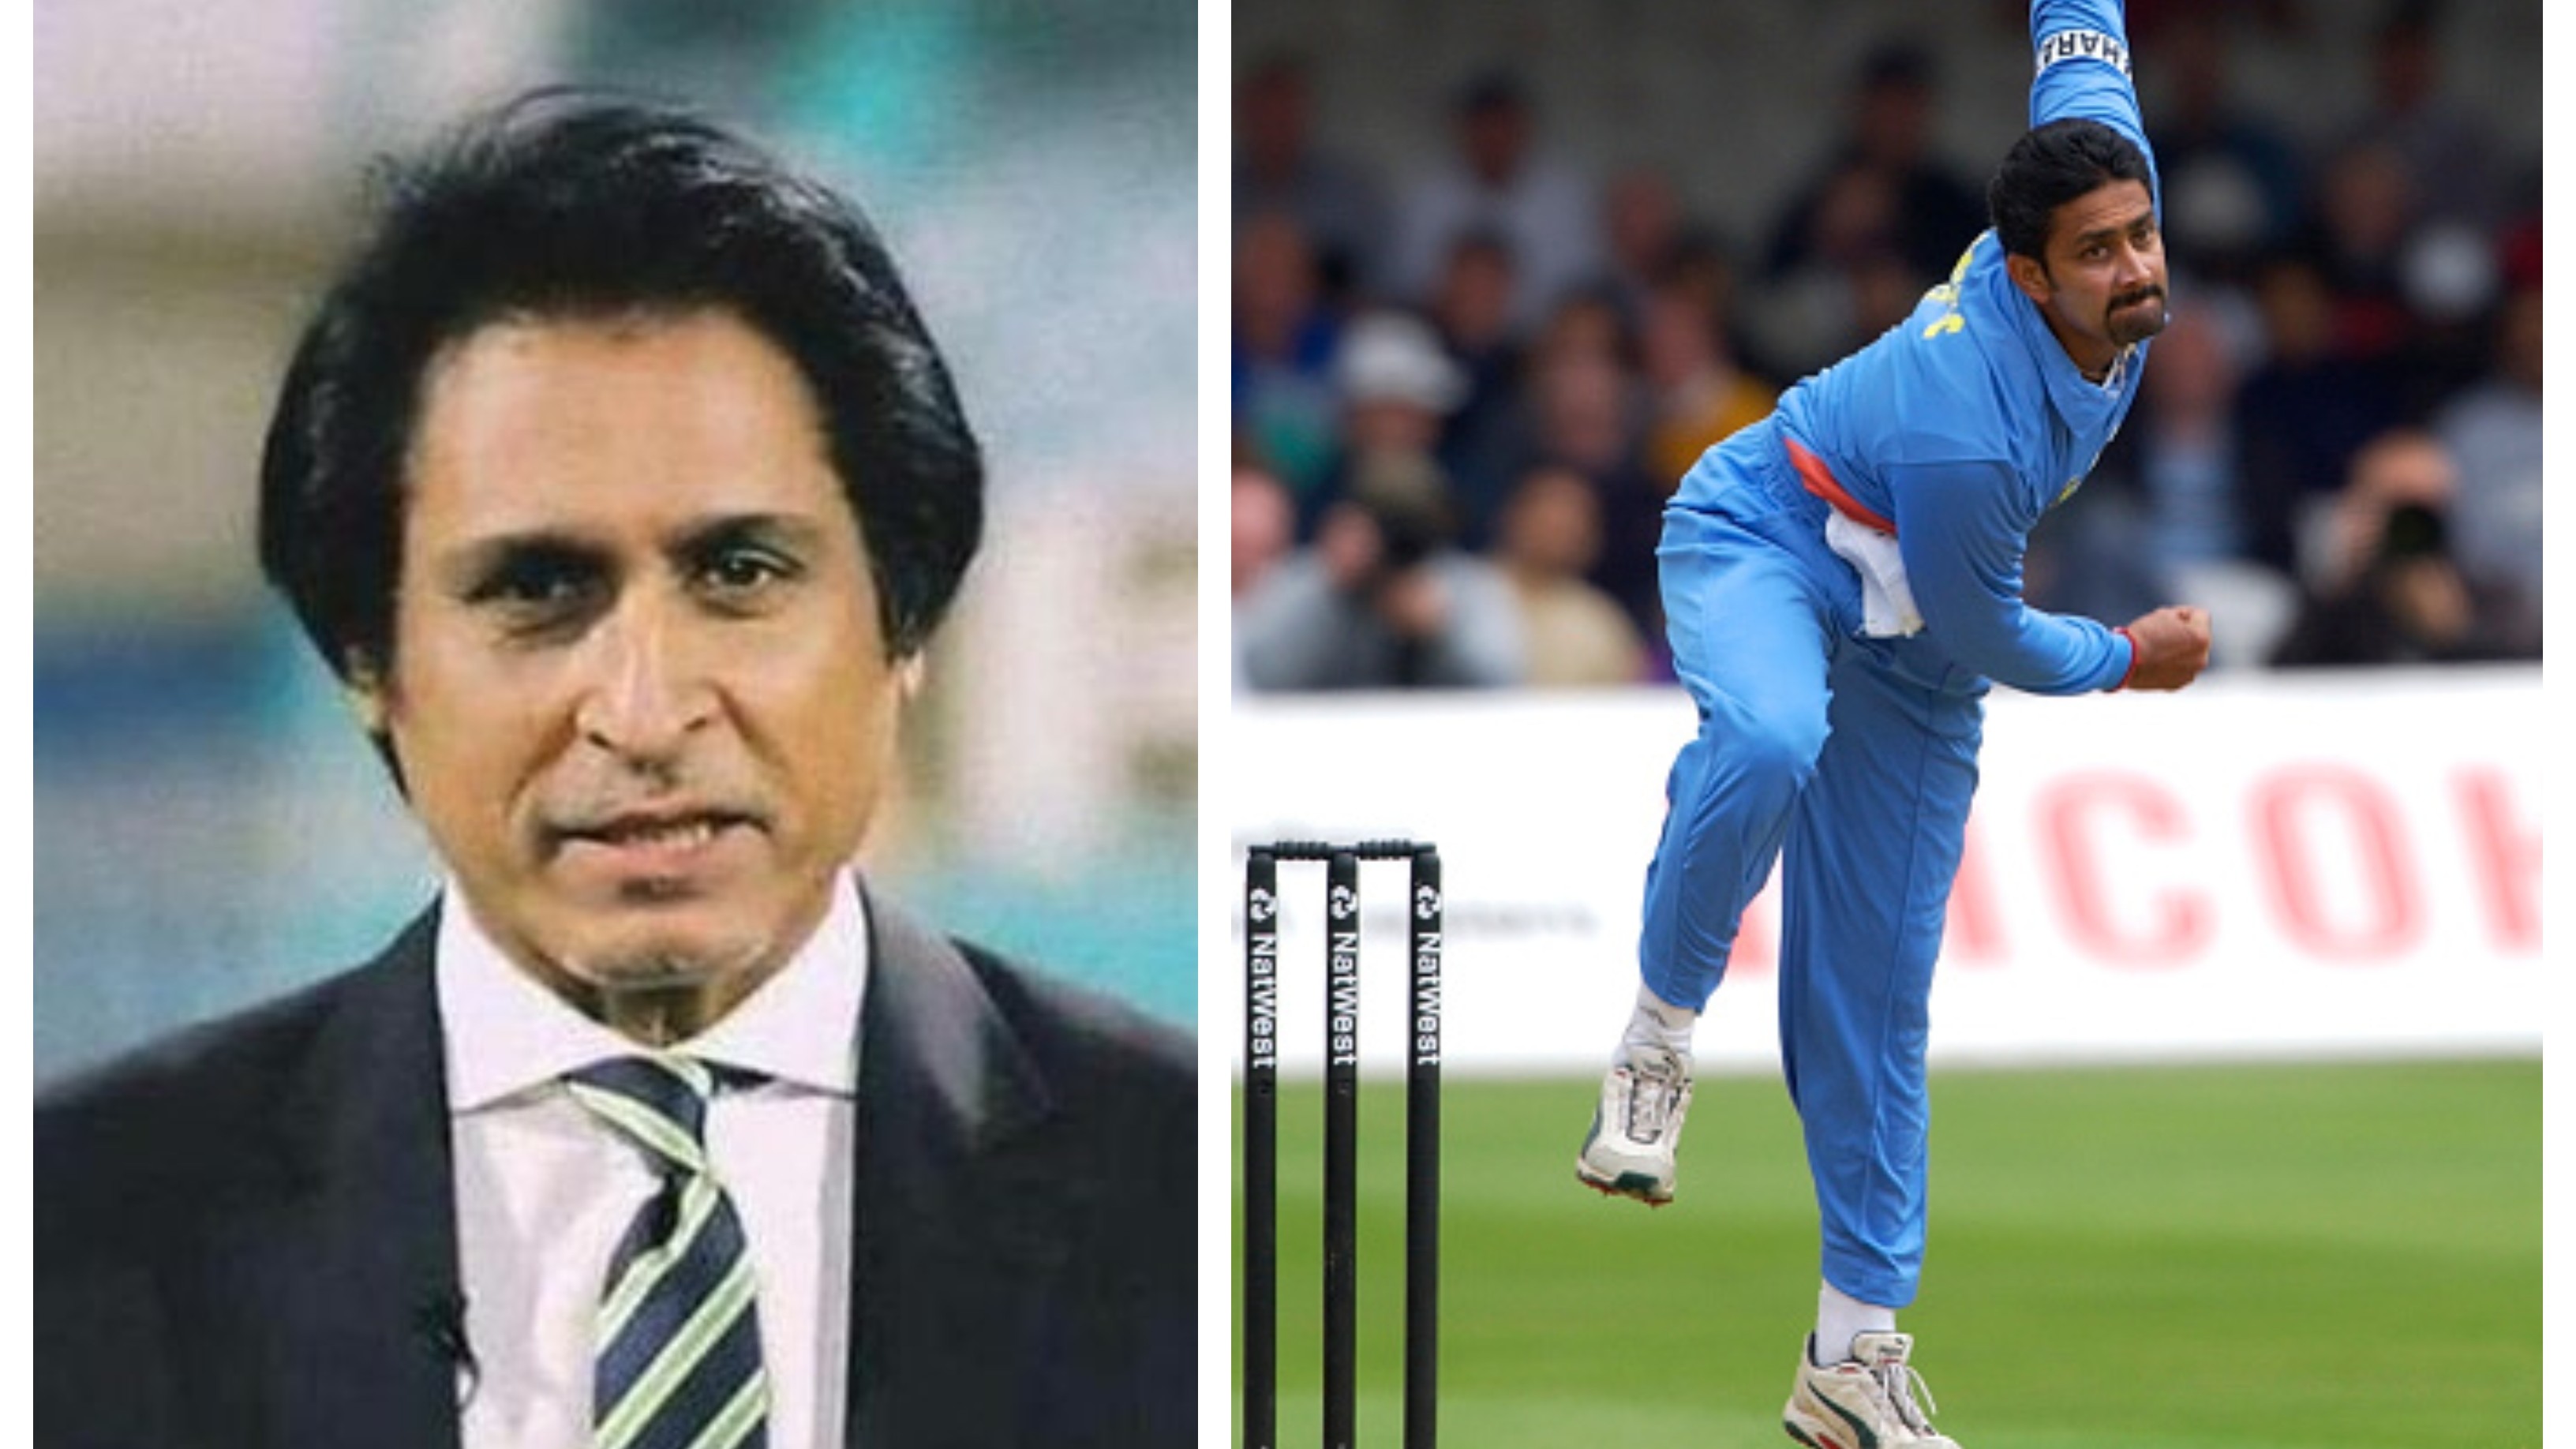 Ramiz Raja picks Anil Kumble as sole Indian in bowling attack for combined IND-PAK XI 